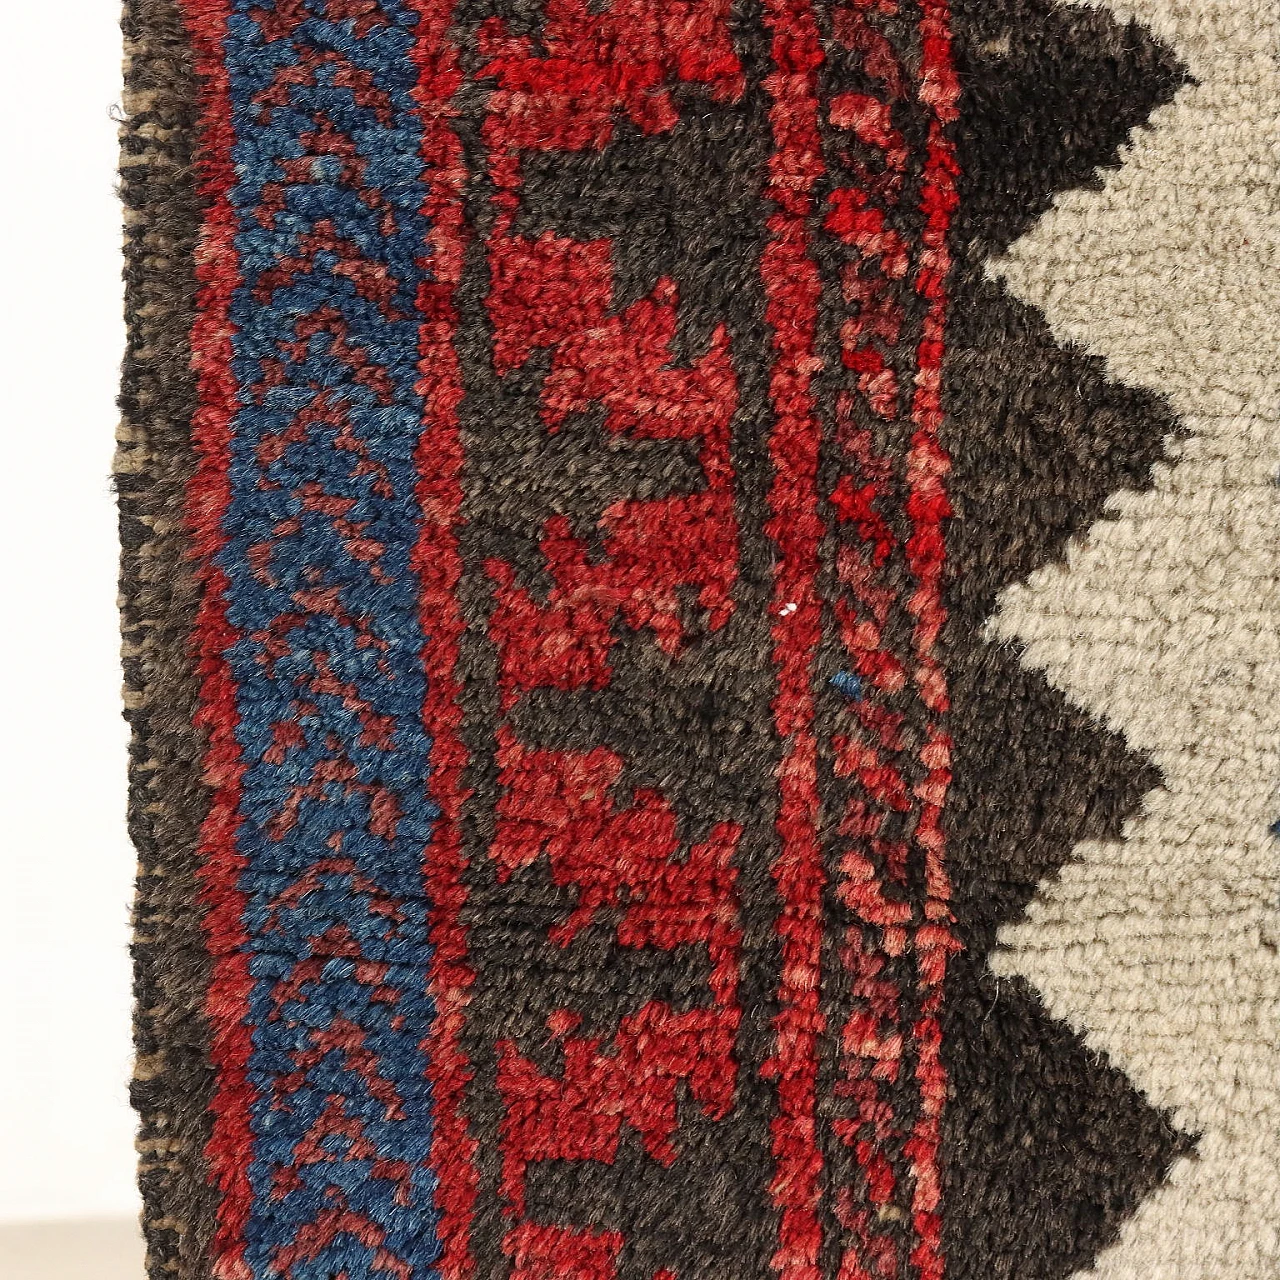 Iranian red, blue and beige wool Beluchi rug 5